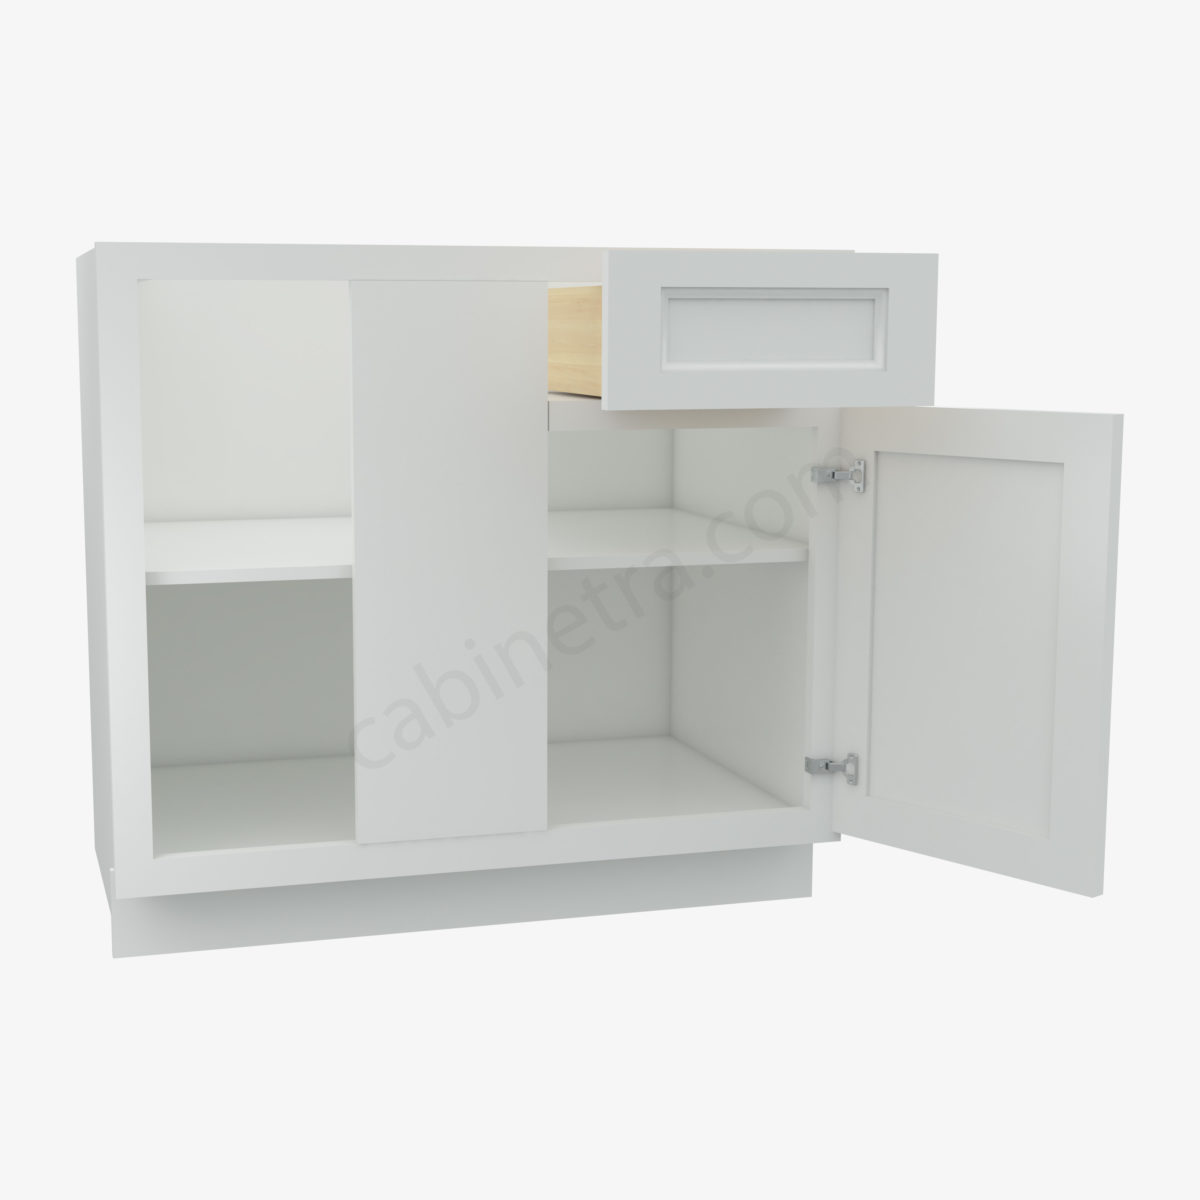 TW BBLC39 42 36W 1 Forevermark Uptown White Cabinetra scaled